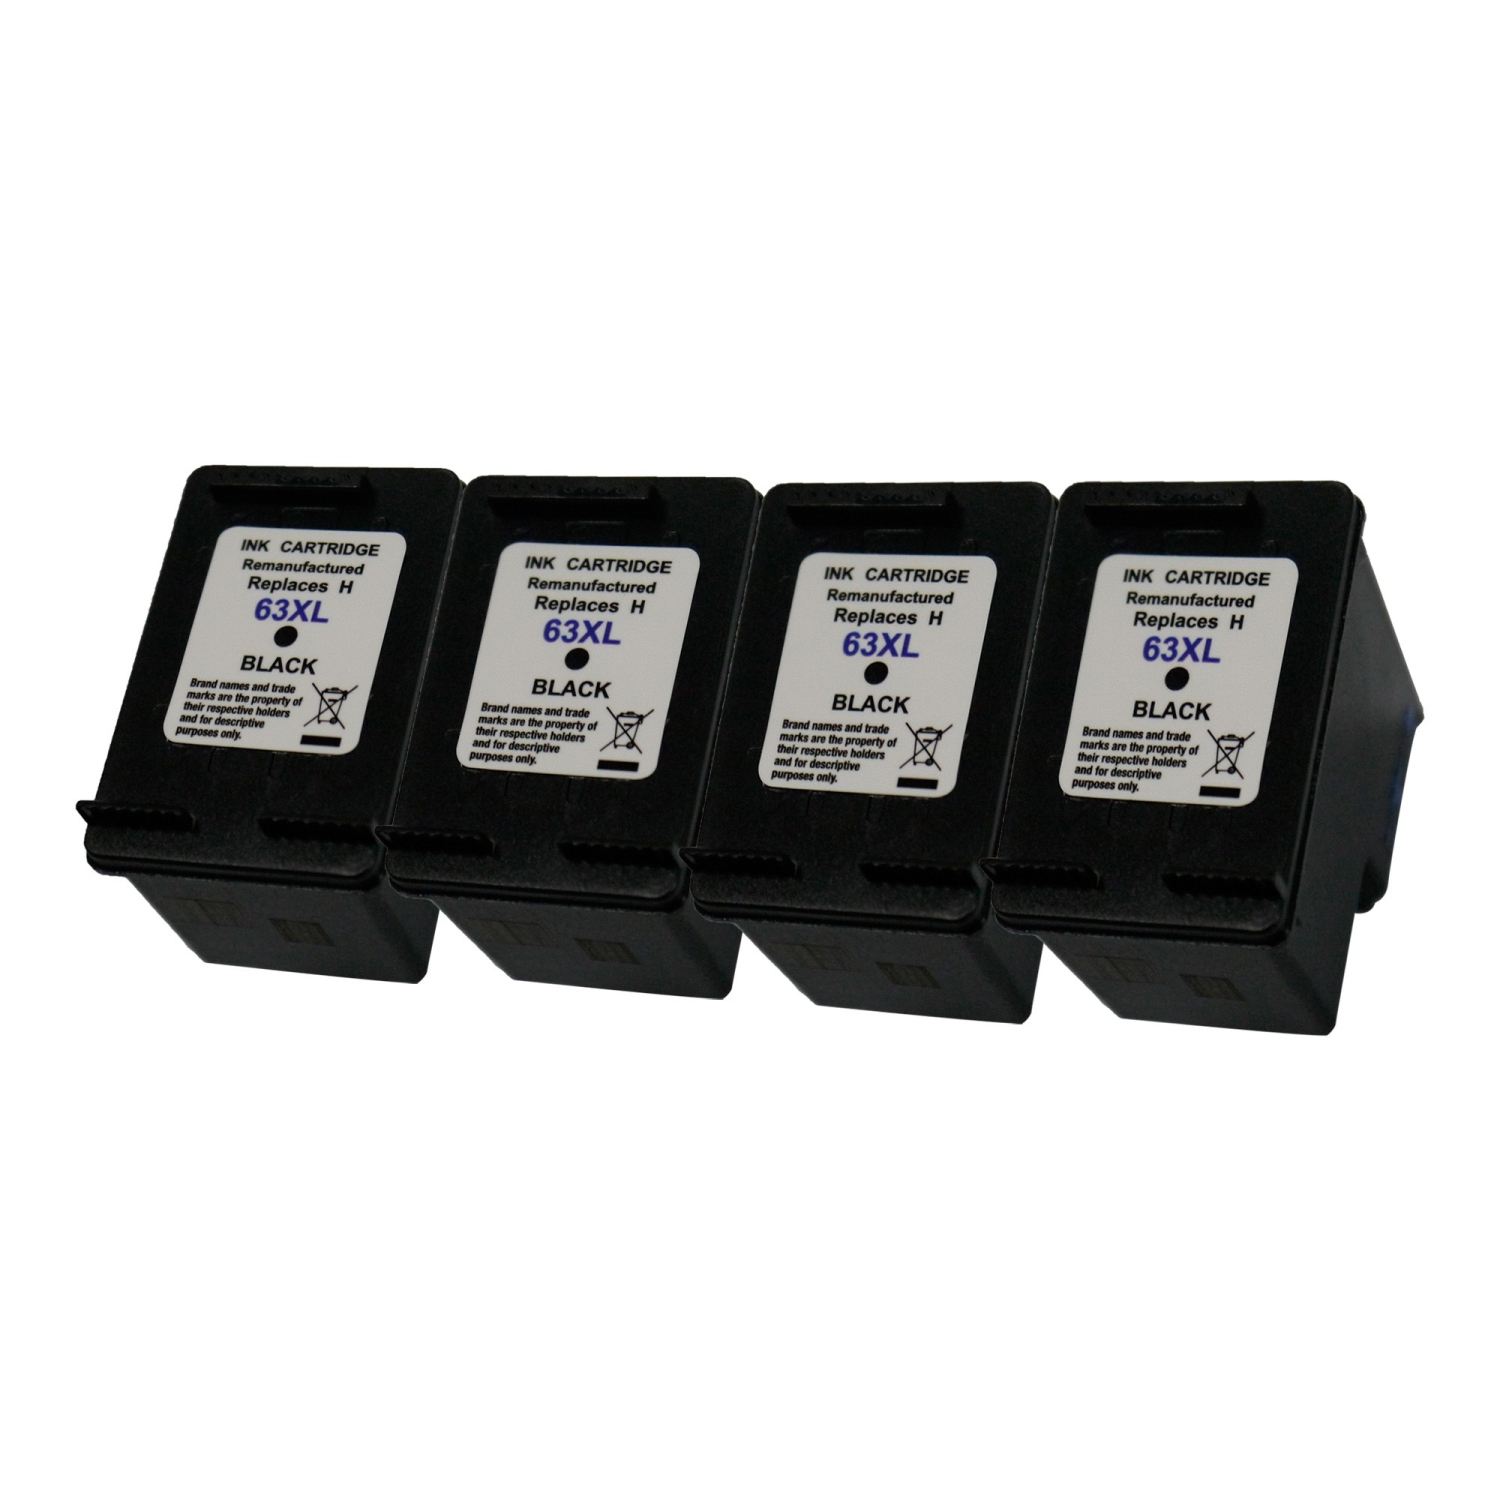 NEW SUPERIOR QUALITY! HP 63XL Black Compatible Ink Cartridge (4 Pack) - FREE SHIPPING OVER $50!!